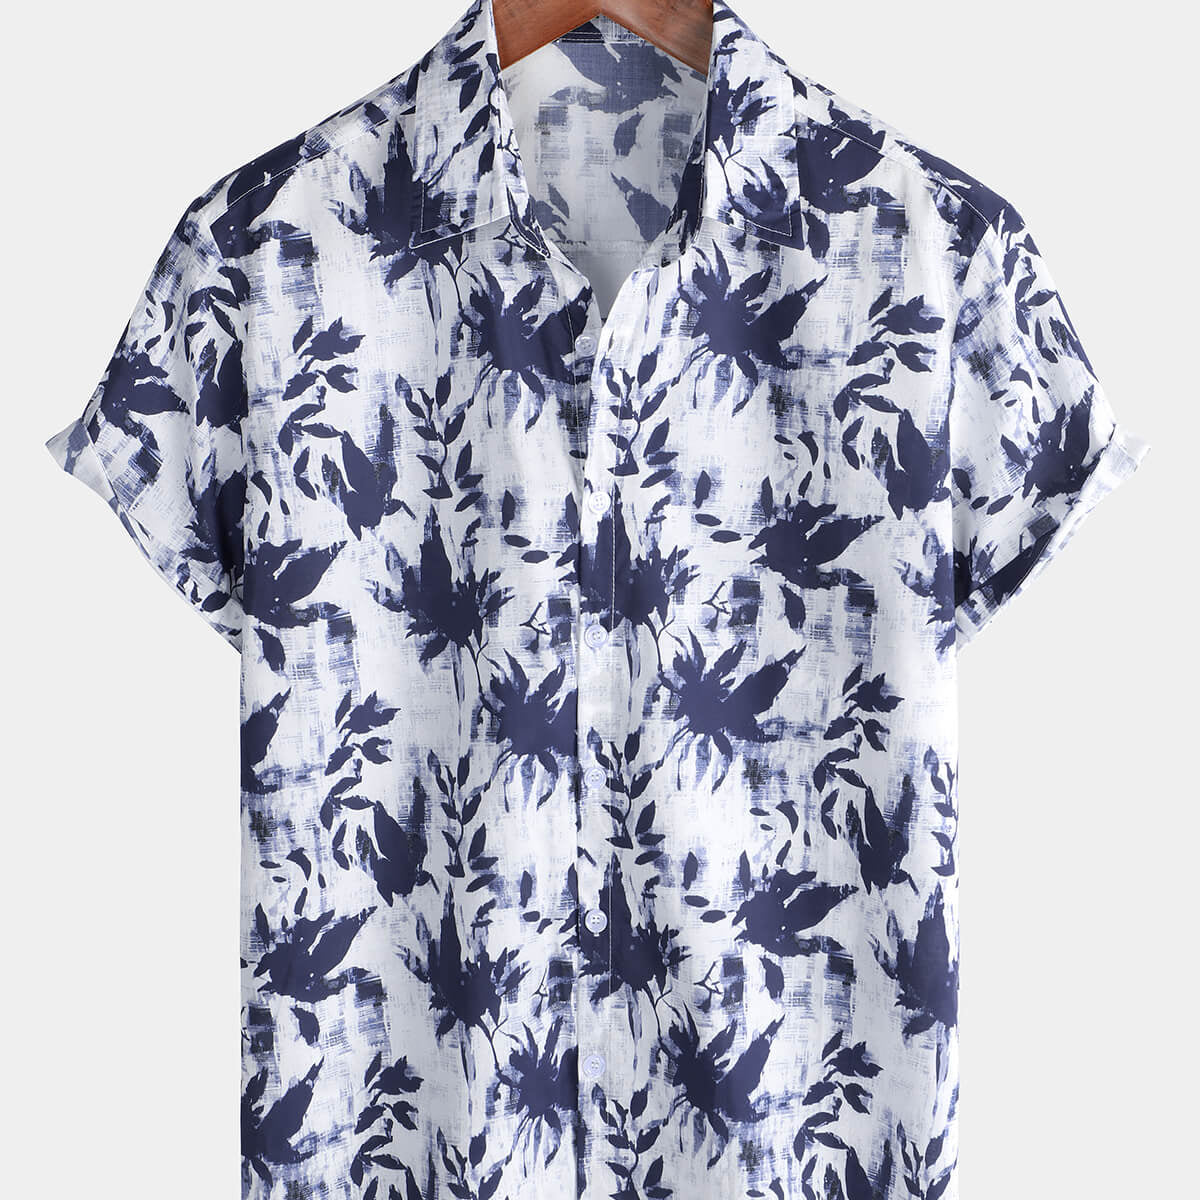 Men's Vintage Holiday Cotton Hawaiian Floral Button Up Breathable Short Sleeve Shirt